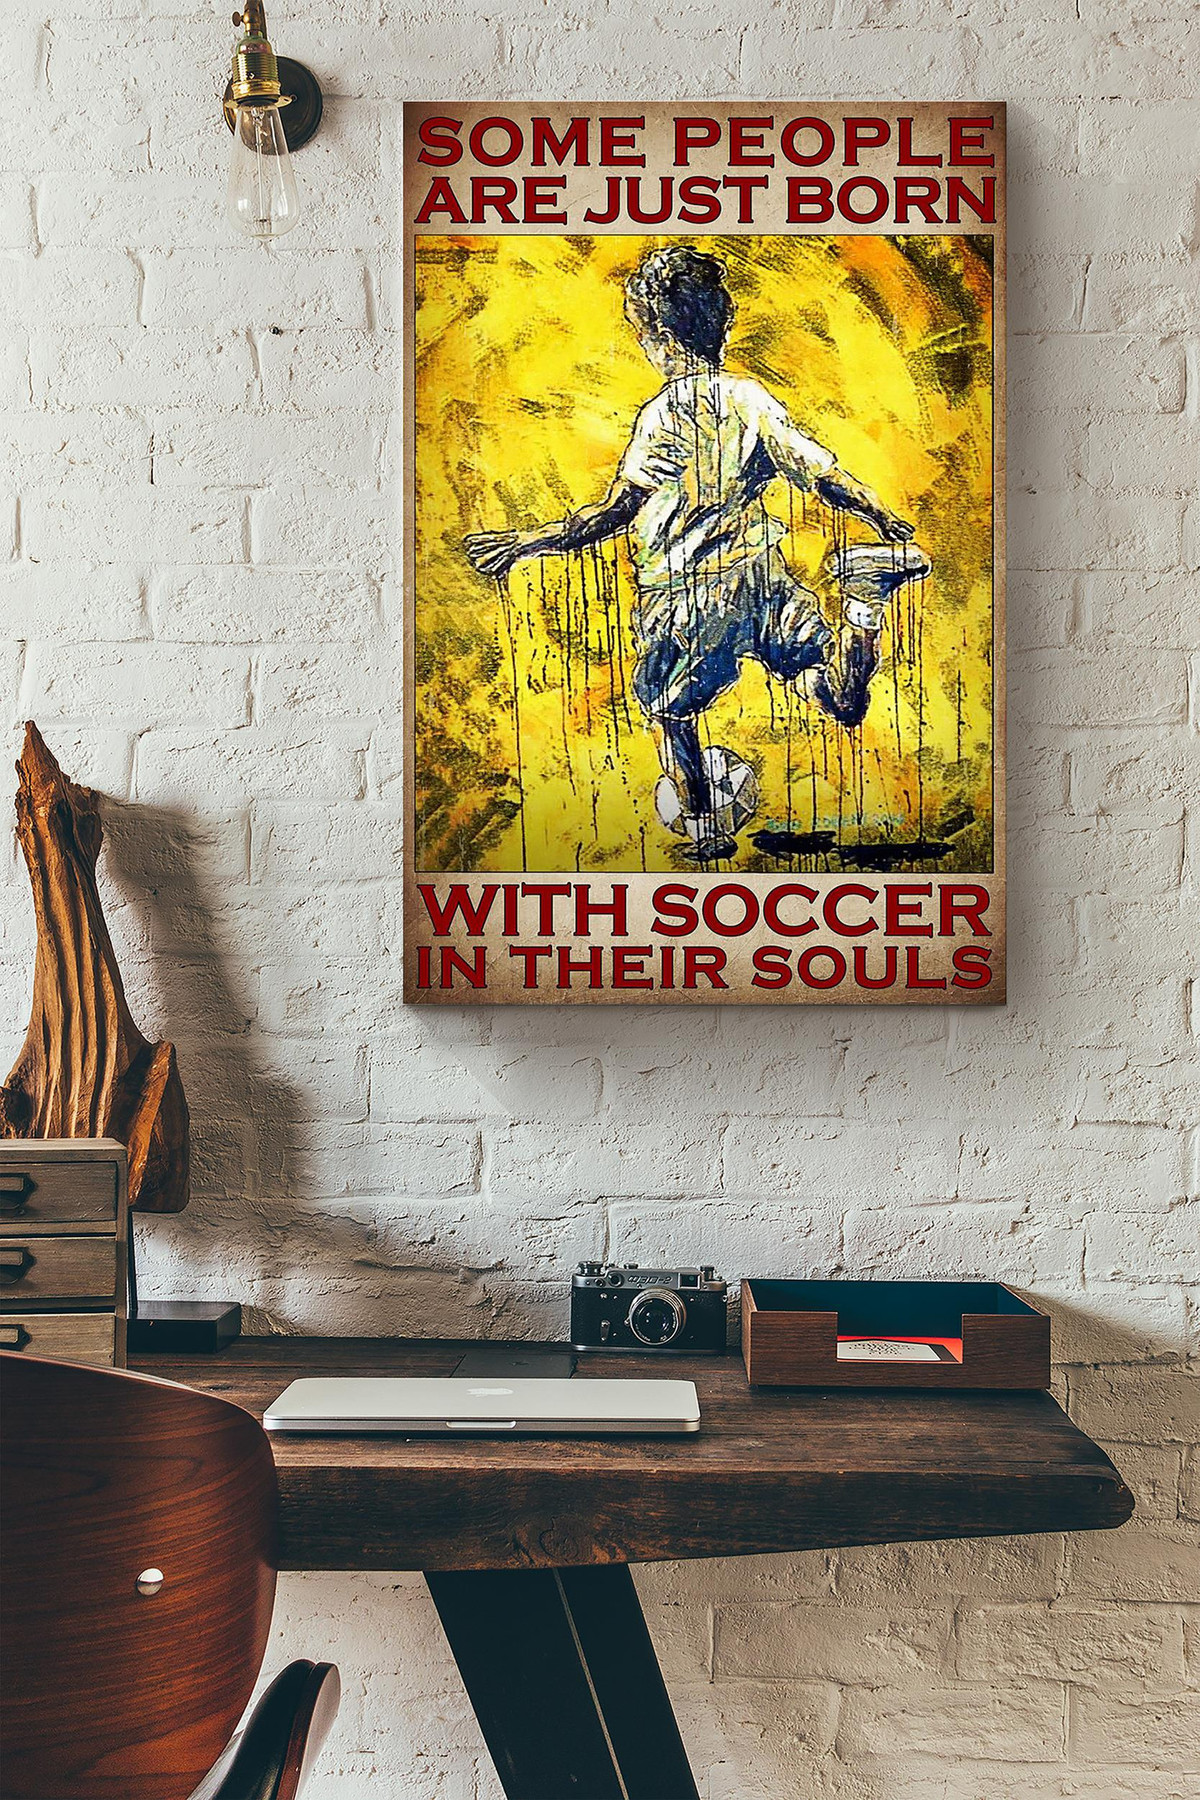 Some People Are Just Born With Soccer In Their Souls Canvas Painting Ideas, Canvas Hanging Prints, Gift Idea Framed Prints, Canvas Paintings Wrapped Canvas 8x10